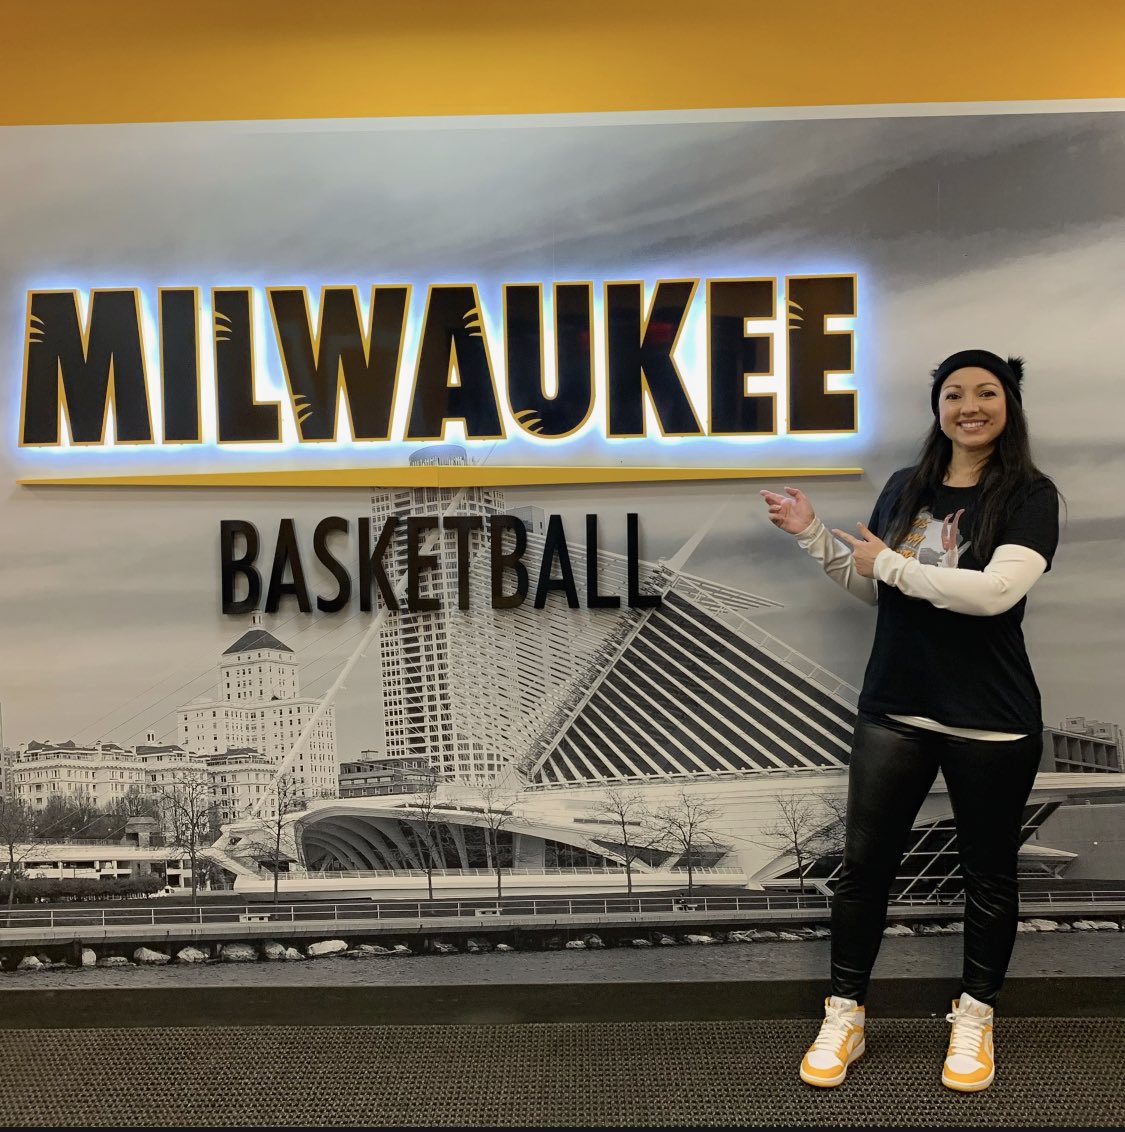 Had a great tour of Milwaukee’s awesome new facilities and incredible time watching practice in preparation for the #HLMBB opener tomorrow 🎉🏀 

Appreciate the time, opportunity and warm hospitality @Mwinans15 & @MKE_MBB. Let’s get this dub! 

#MKEbasketball #ForTheMKE